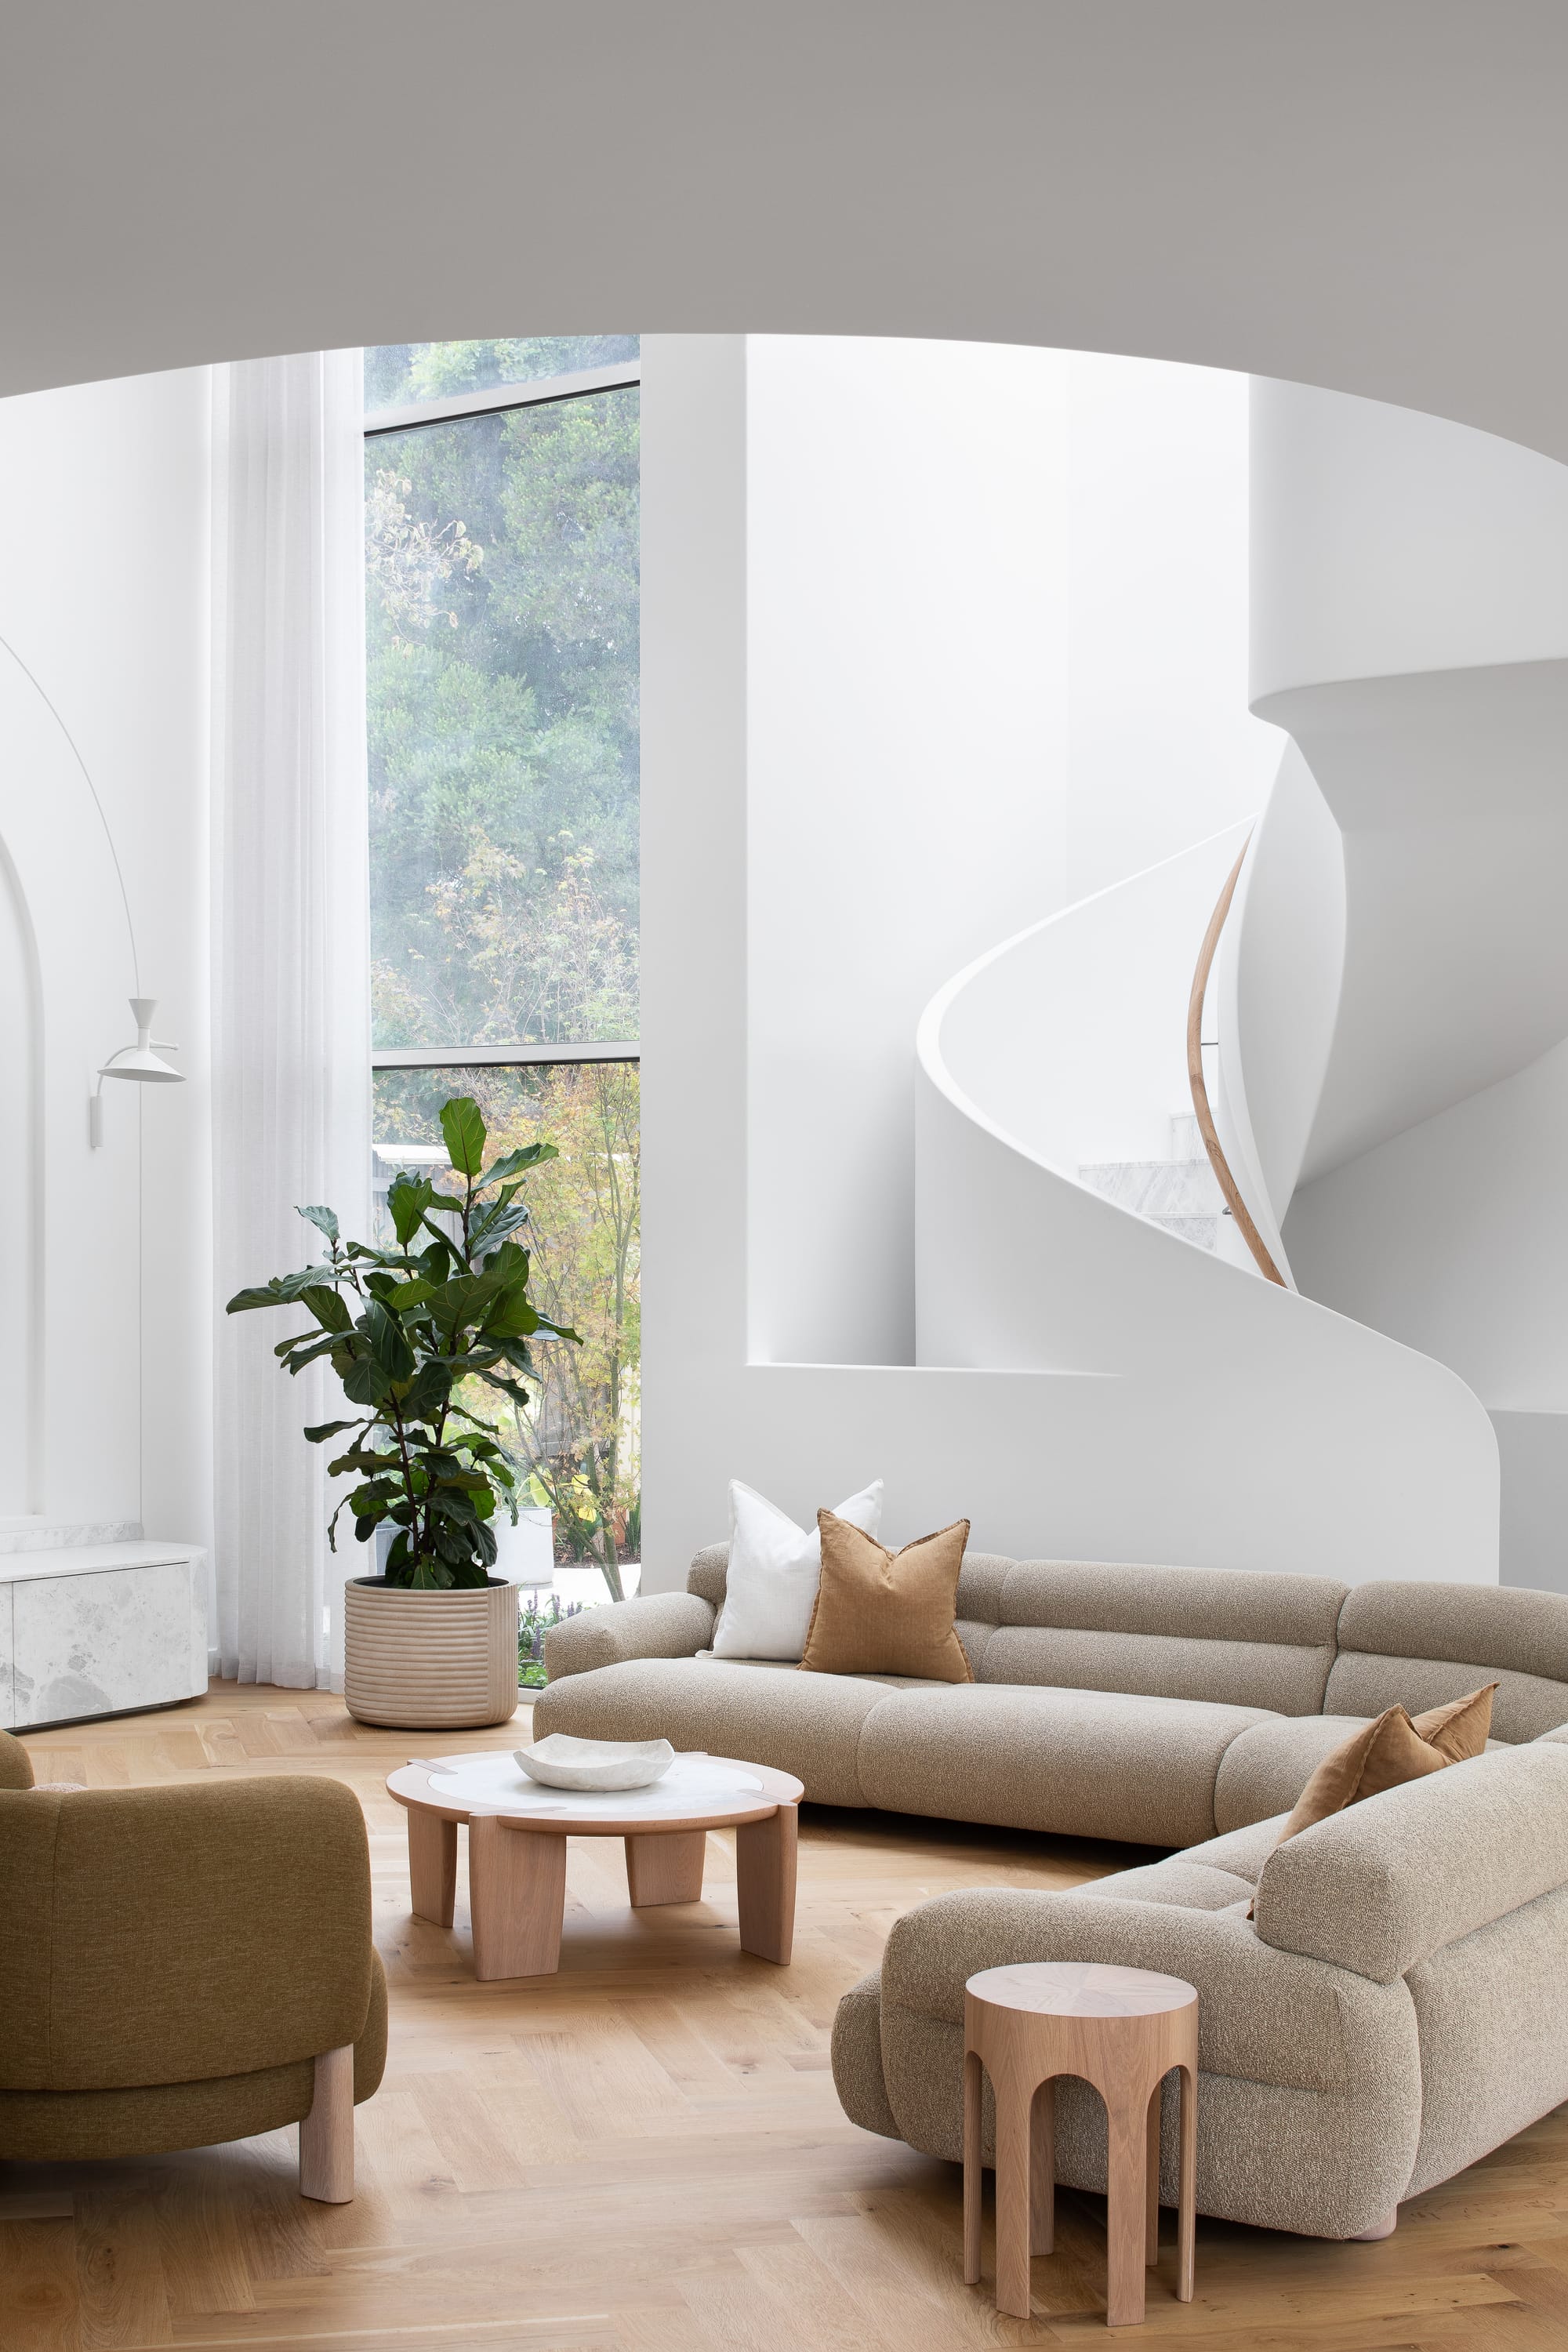 The Grove by Taouk Architects.A bright and airy living space with tall white walls and a spiral staircase with a sleek white balustrade. Natural light floods in from large windows overlooking greenery. The room is furnished with a beige sofa, matching armchairs, and a small wooden coffee table, creating a cozy yet modern atmosphere.